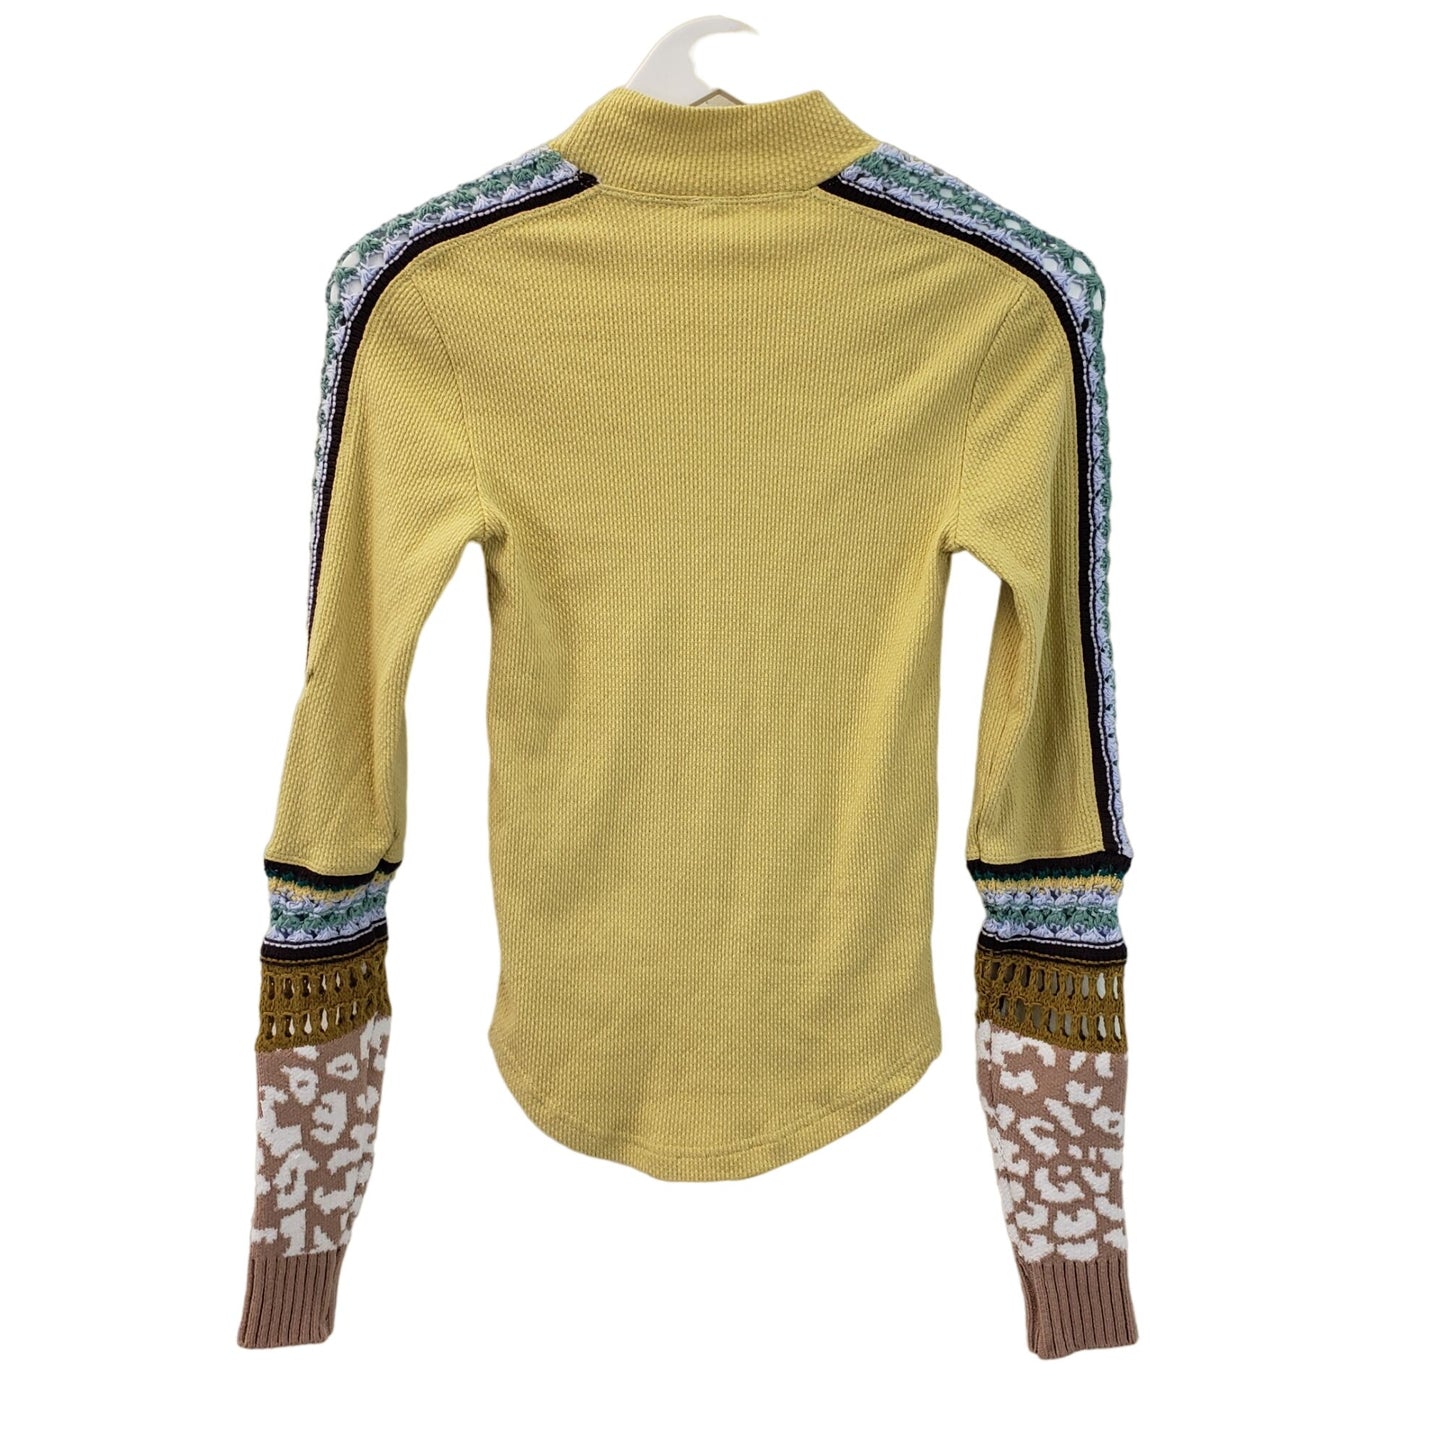 NWT Free People Waffle Knit Sweater Sleeve Top Size XS